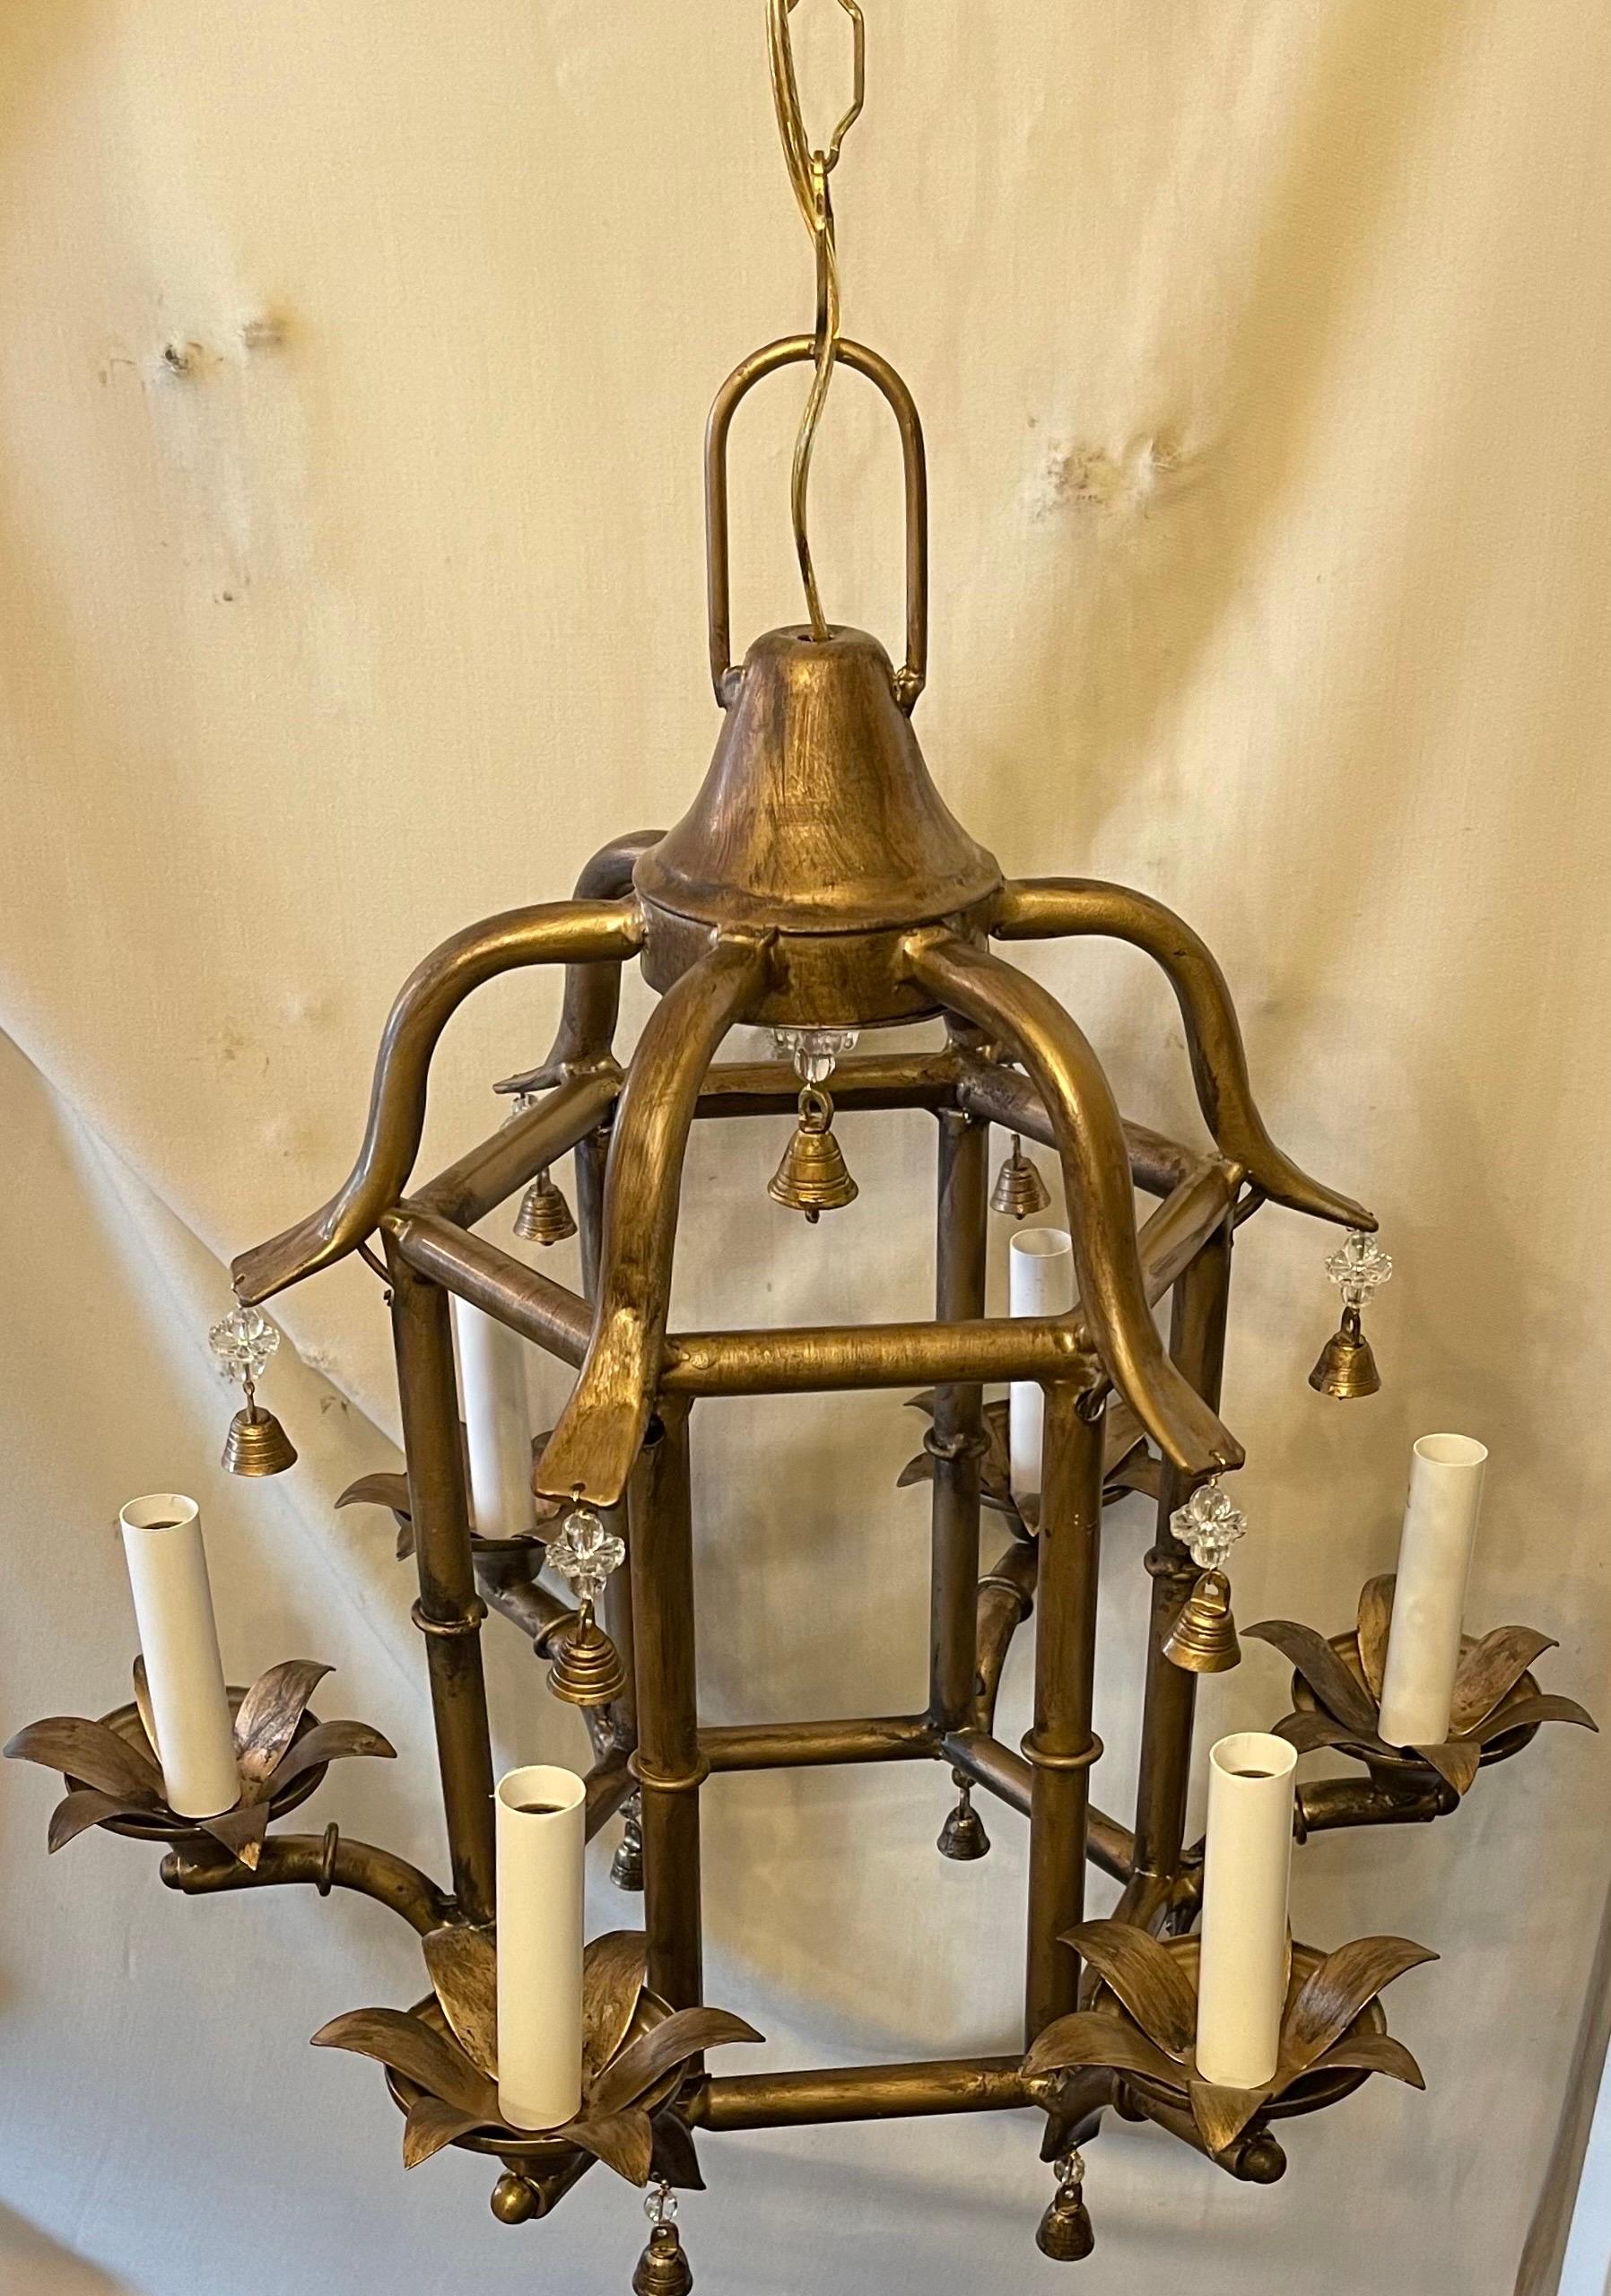 Wonderful Gold Gilt Tole Pagoda Bamboo Chinoiserie Lantern Fixture Chandelier In Good Condition For Sale In Roslyn, NY